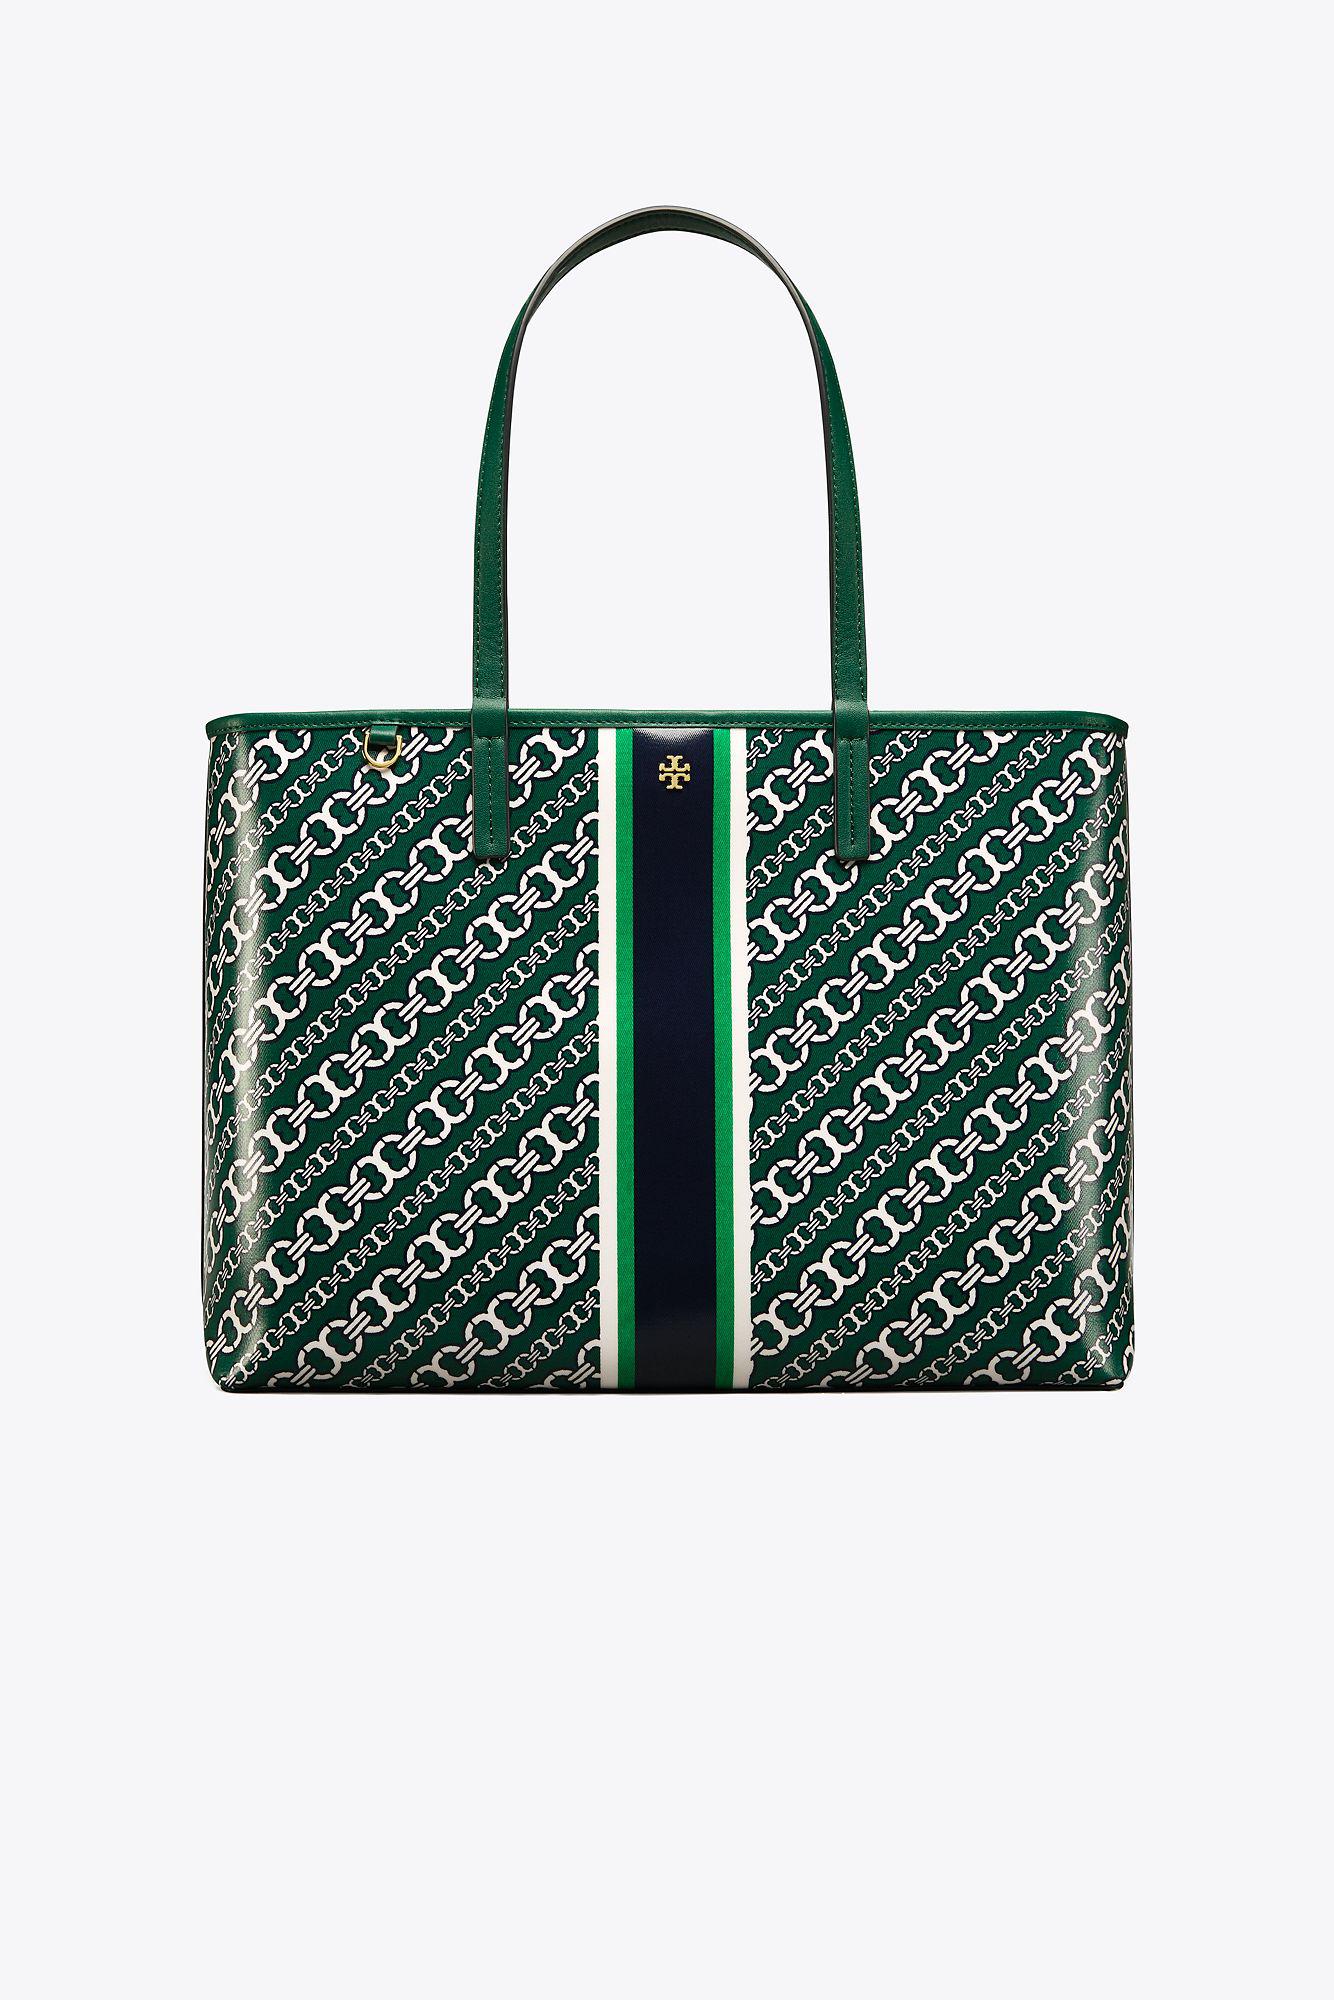 Tory Burch Gemini Link Canvas Small Tote in Green